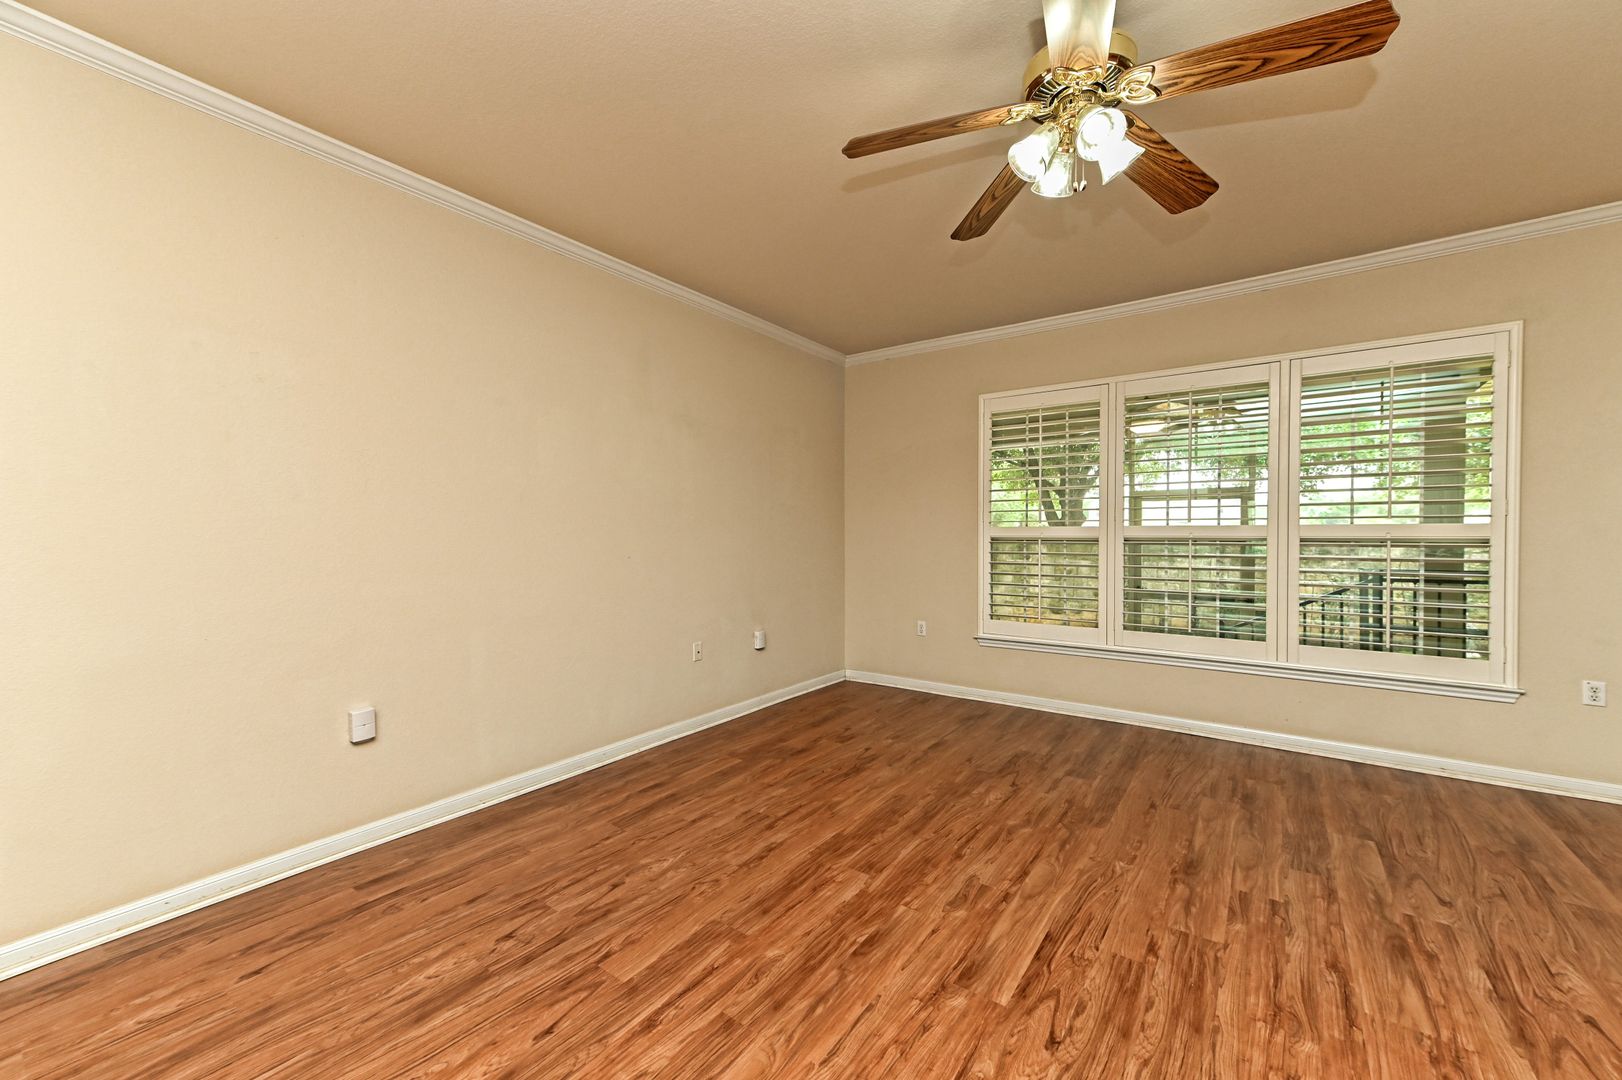 101 Nolan Drive-Unfurnished Sun City Rental Available Now!